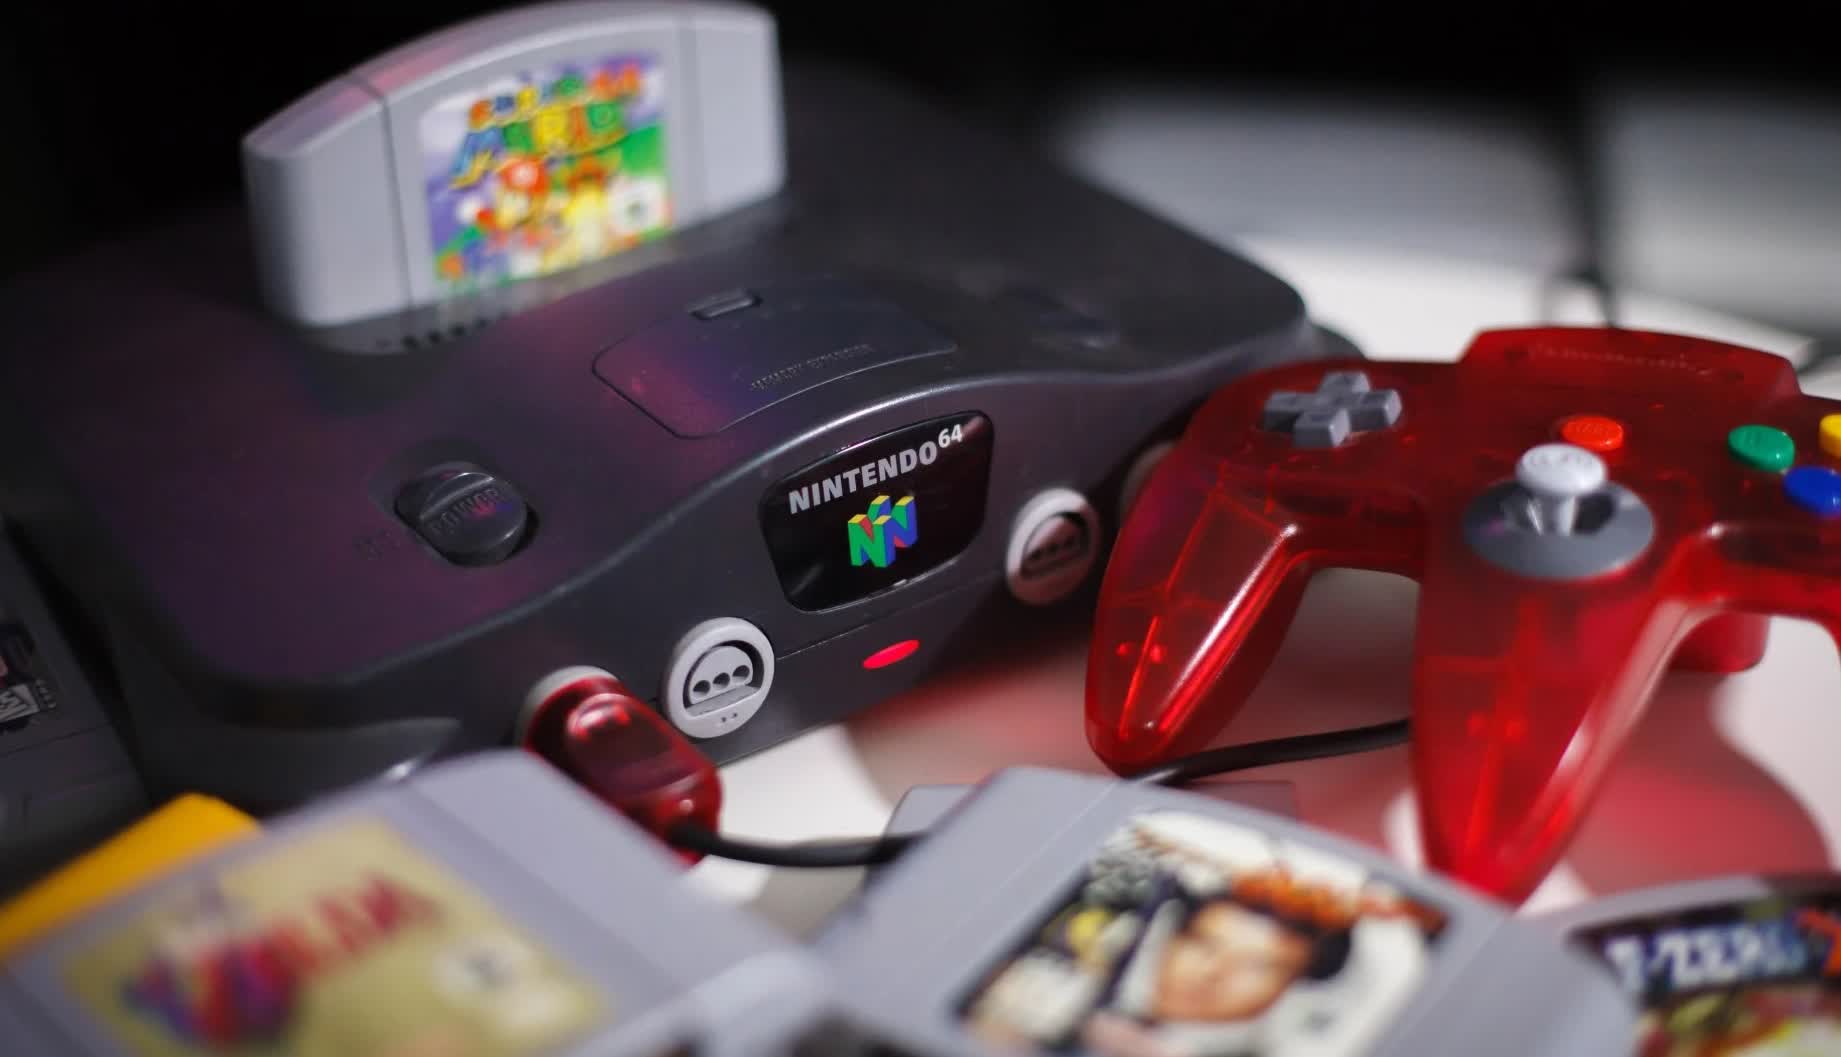 Check out the world's smallest portable Nintendo 64